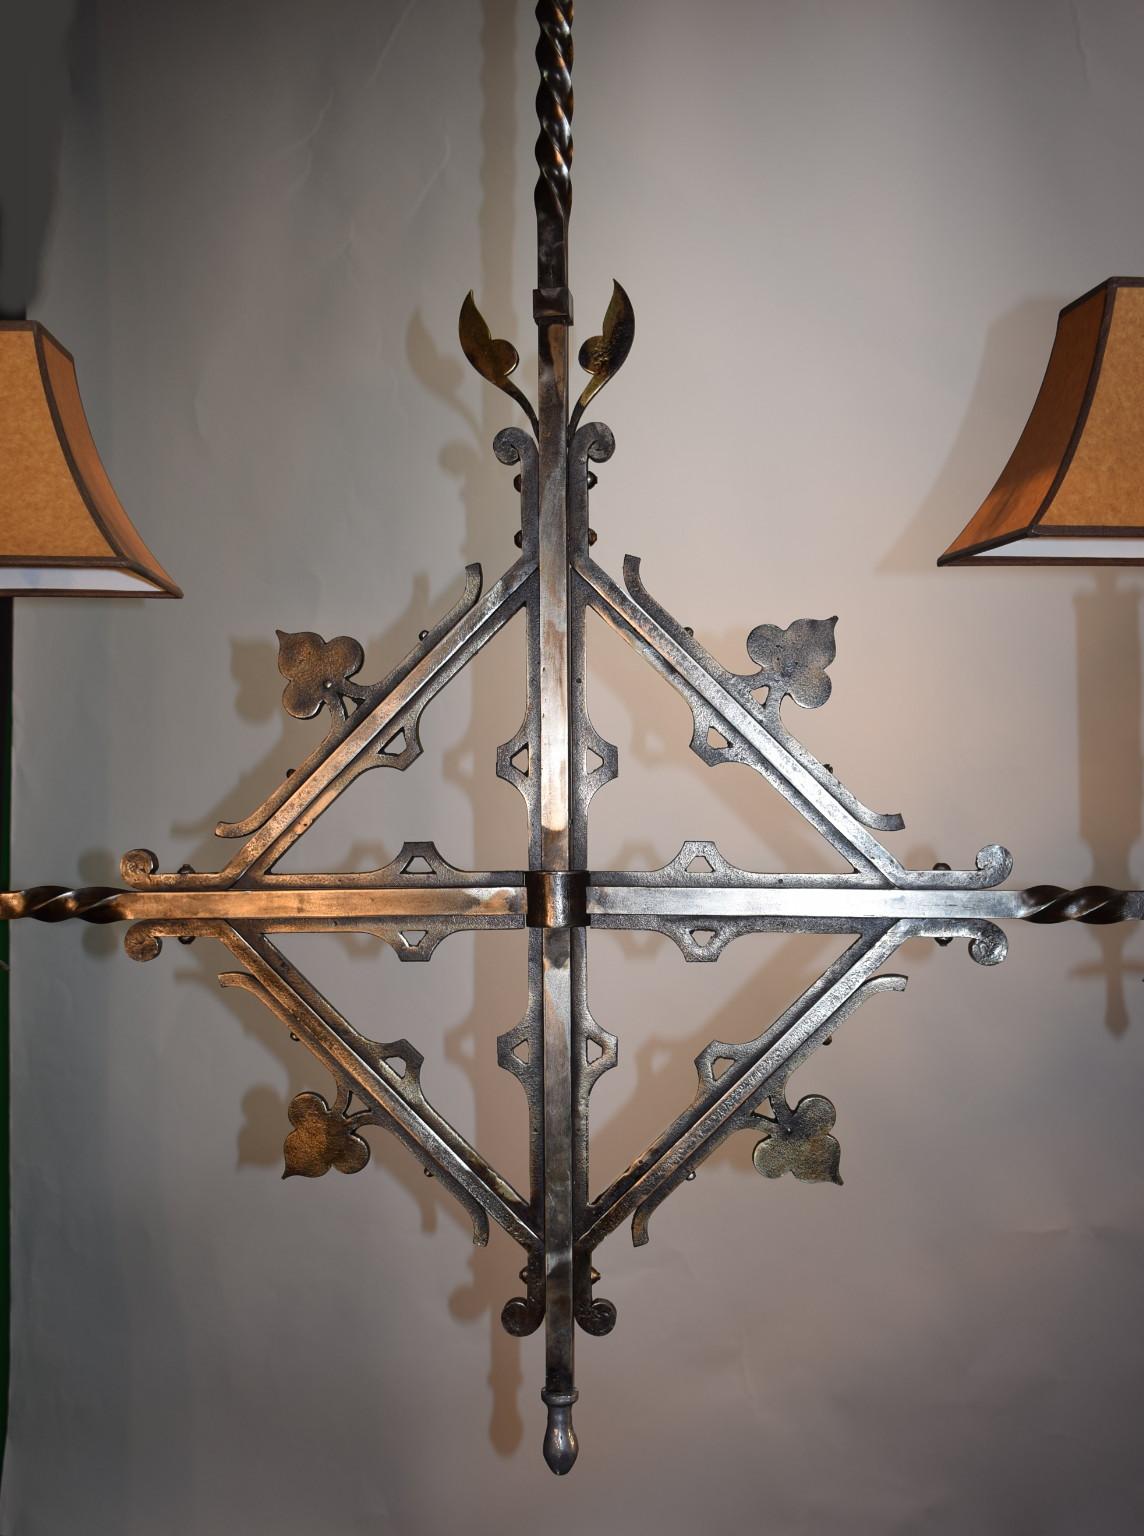 Unusual iron French Gothic style two-light chandelier with shades, great for over kitchen island or billiard table. Four available. The fixture is 58 inches long x 48 inches wide with shades, it is 40 inches wide without the shades.
CW4583